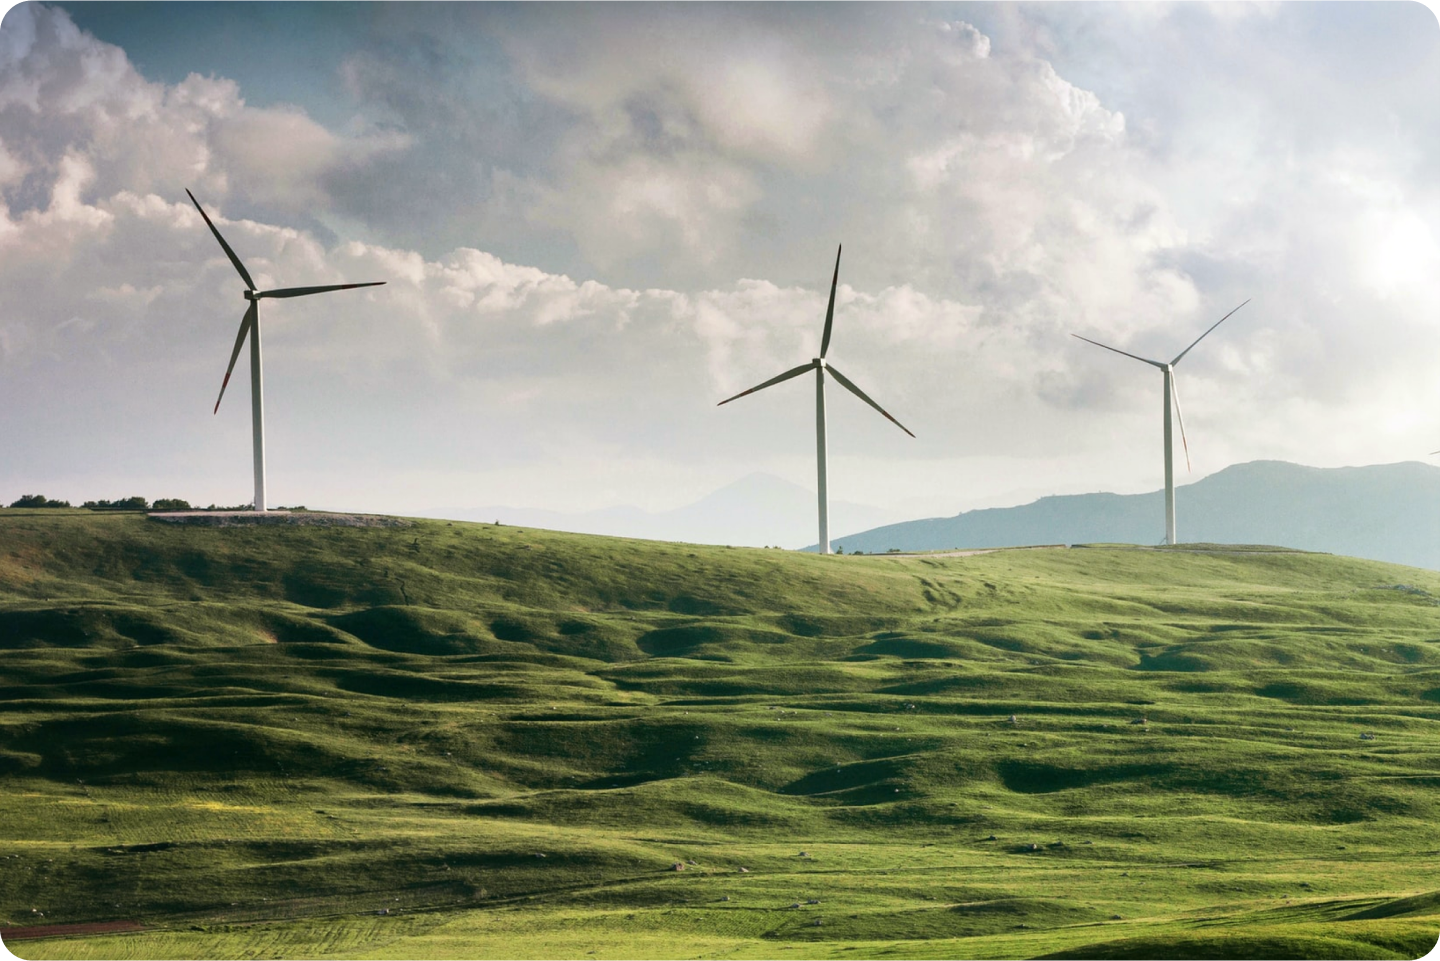 Three large wind turbines standing tall on top of a grassy hill.